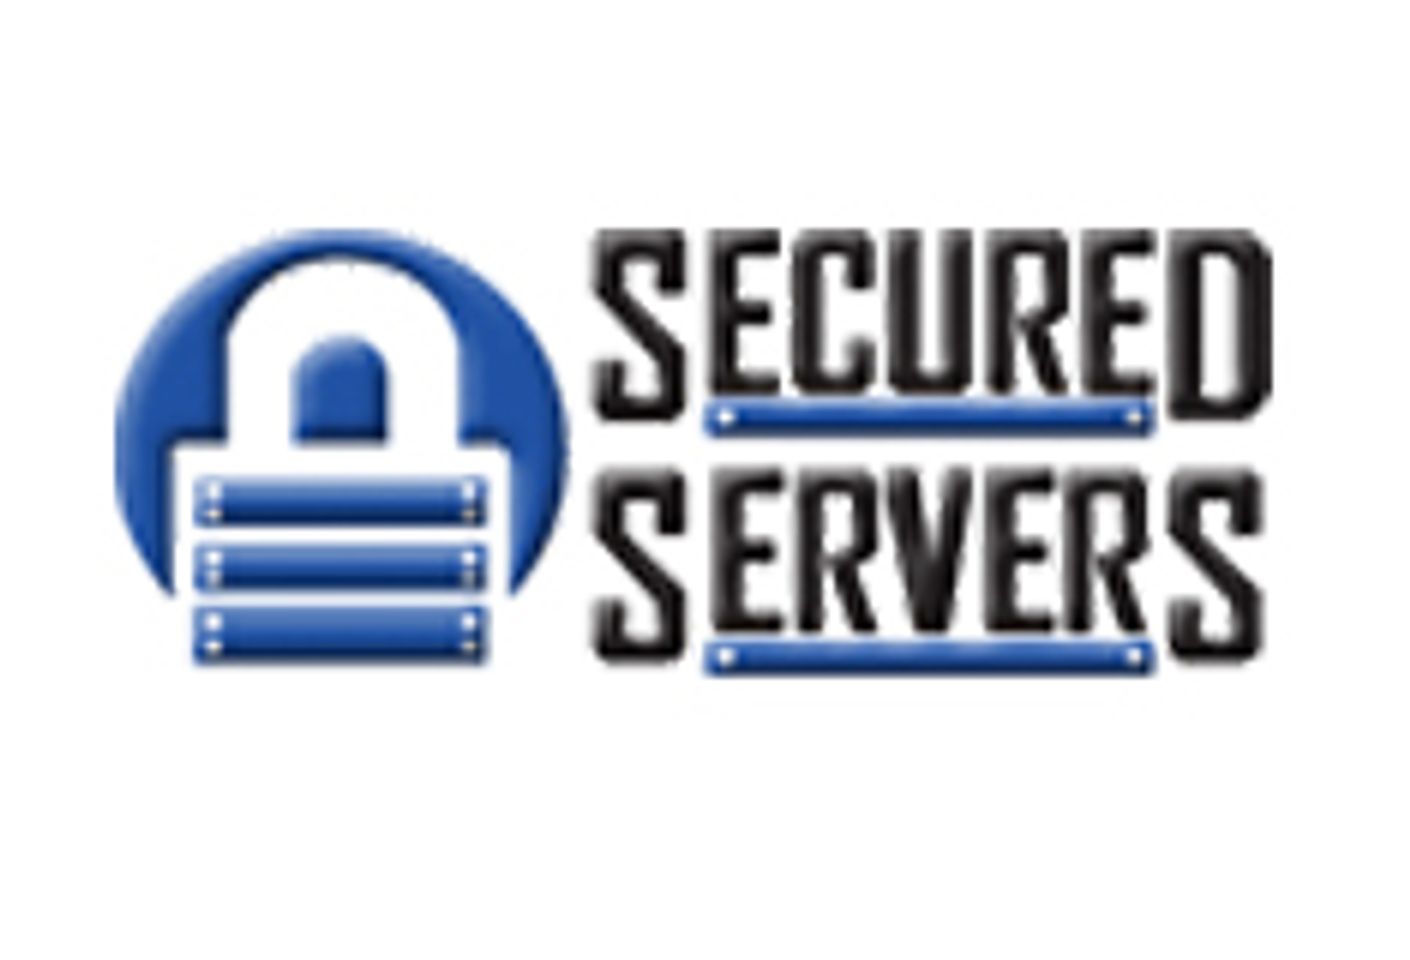 Secured Servers Launches Affiliate Program